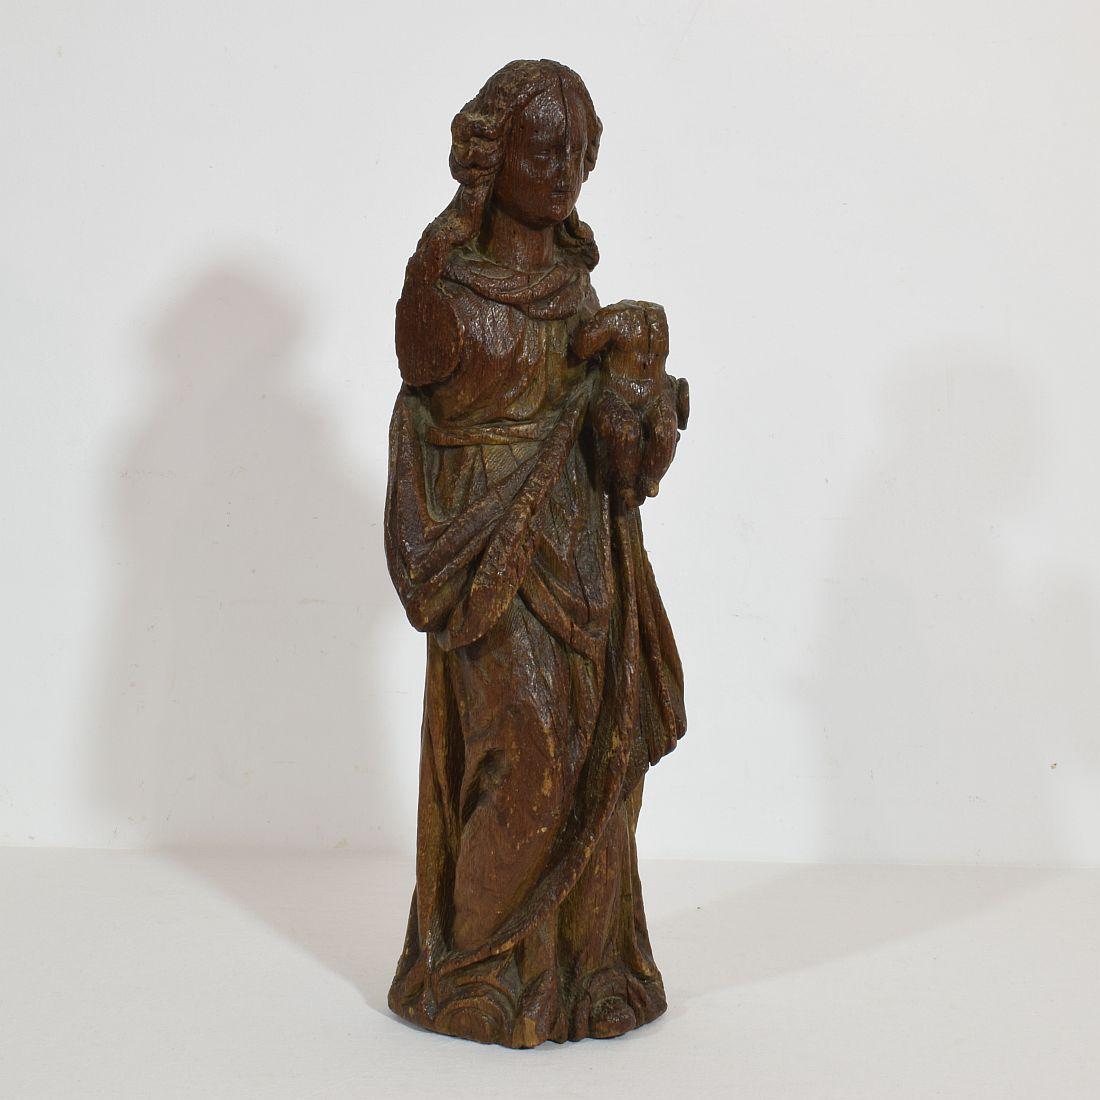 Beautiful early oak statue of a Madonna with child. Clearly visible that this statue has suffered a bit but still beautiful and very strong expression. France, circa 1550. Weathered and losses.